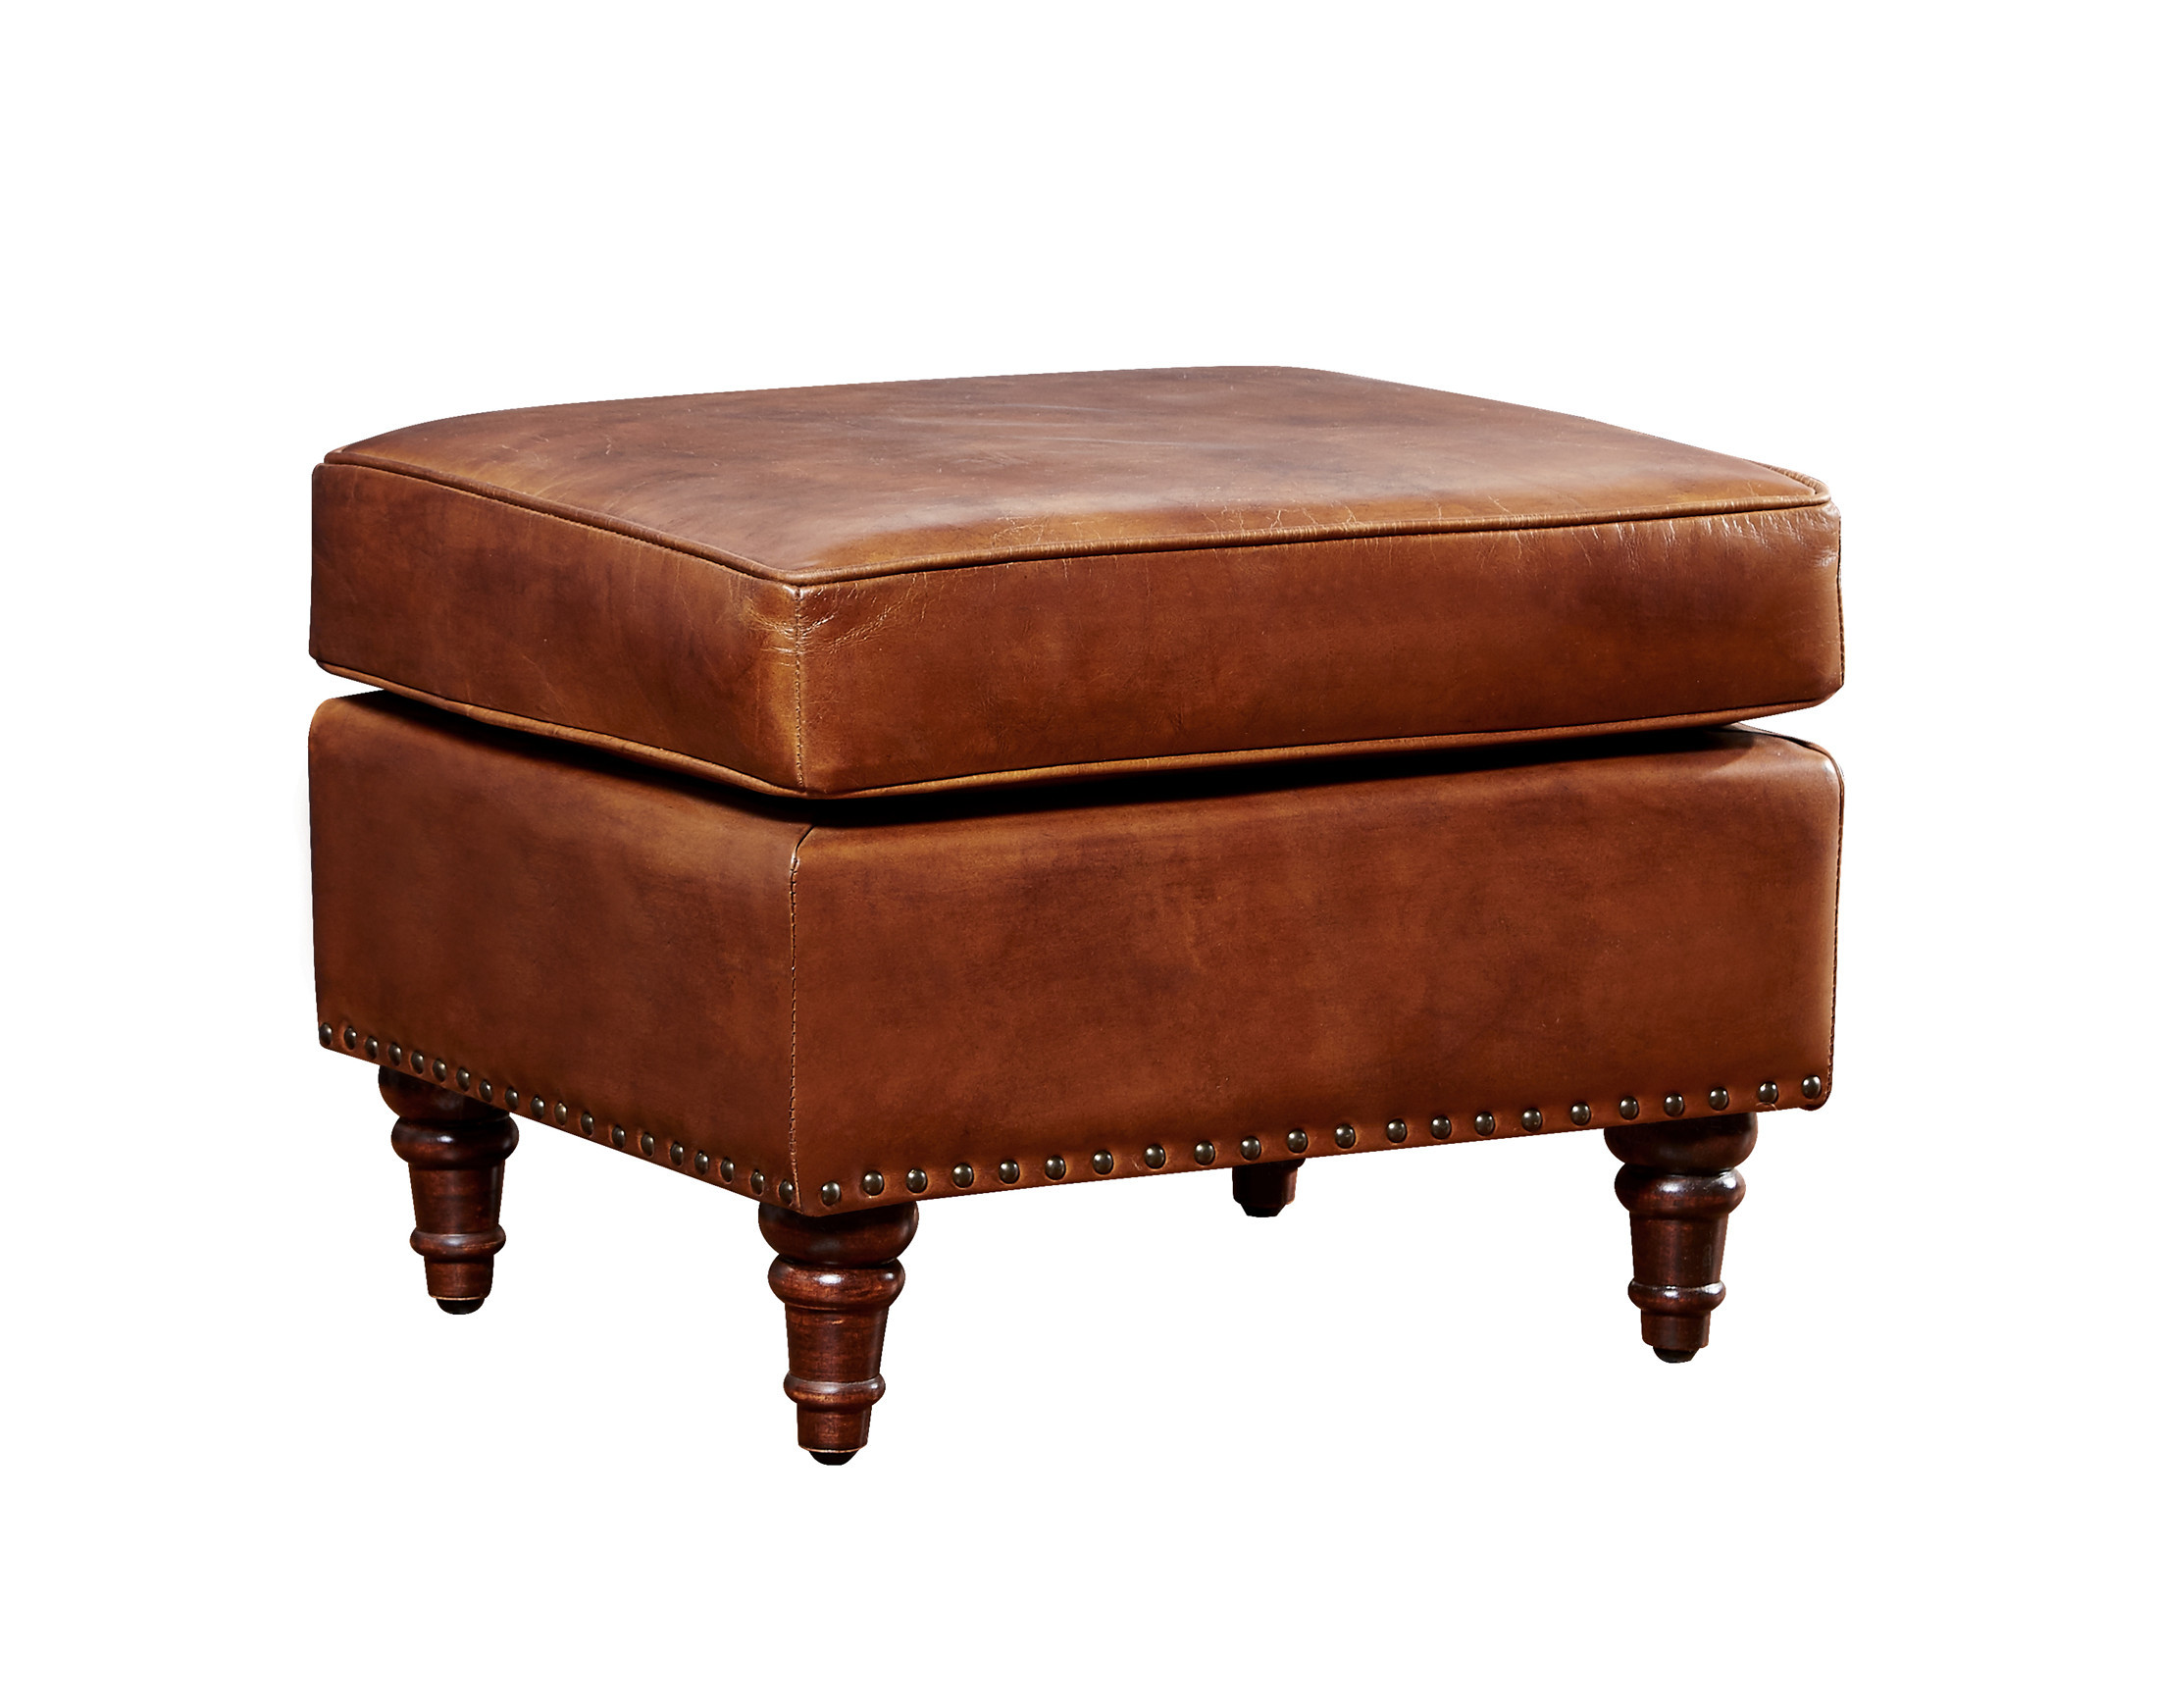 Living Room Retro Vintage Leather Furniture Brown Leather Storage Ottoman With Wood Legs 